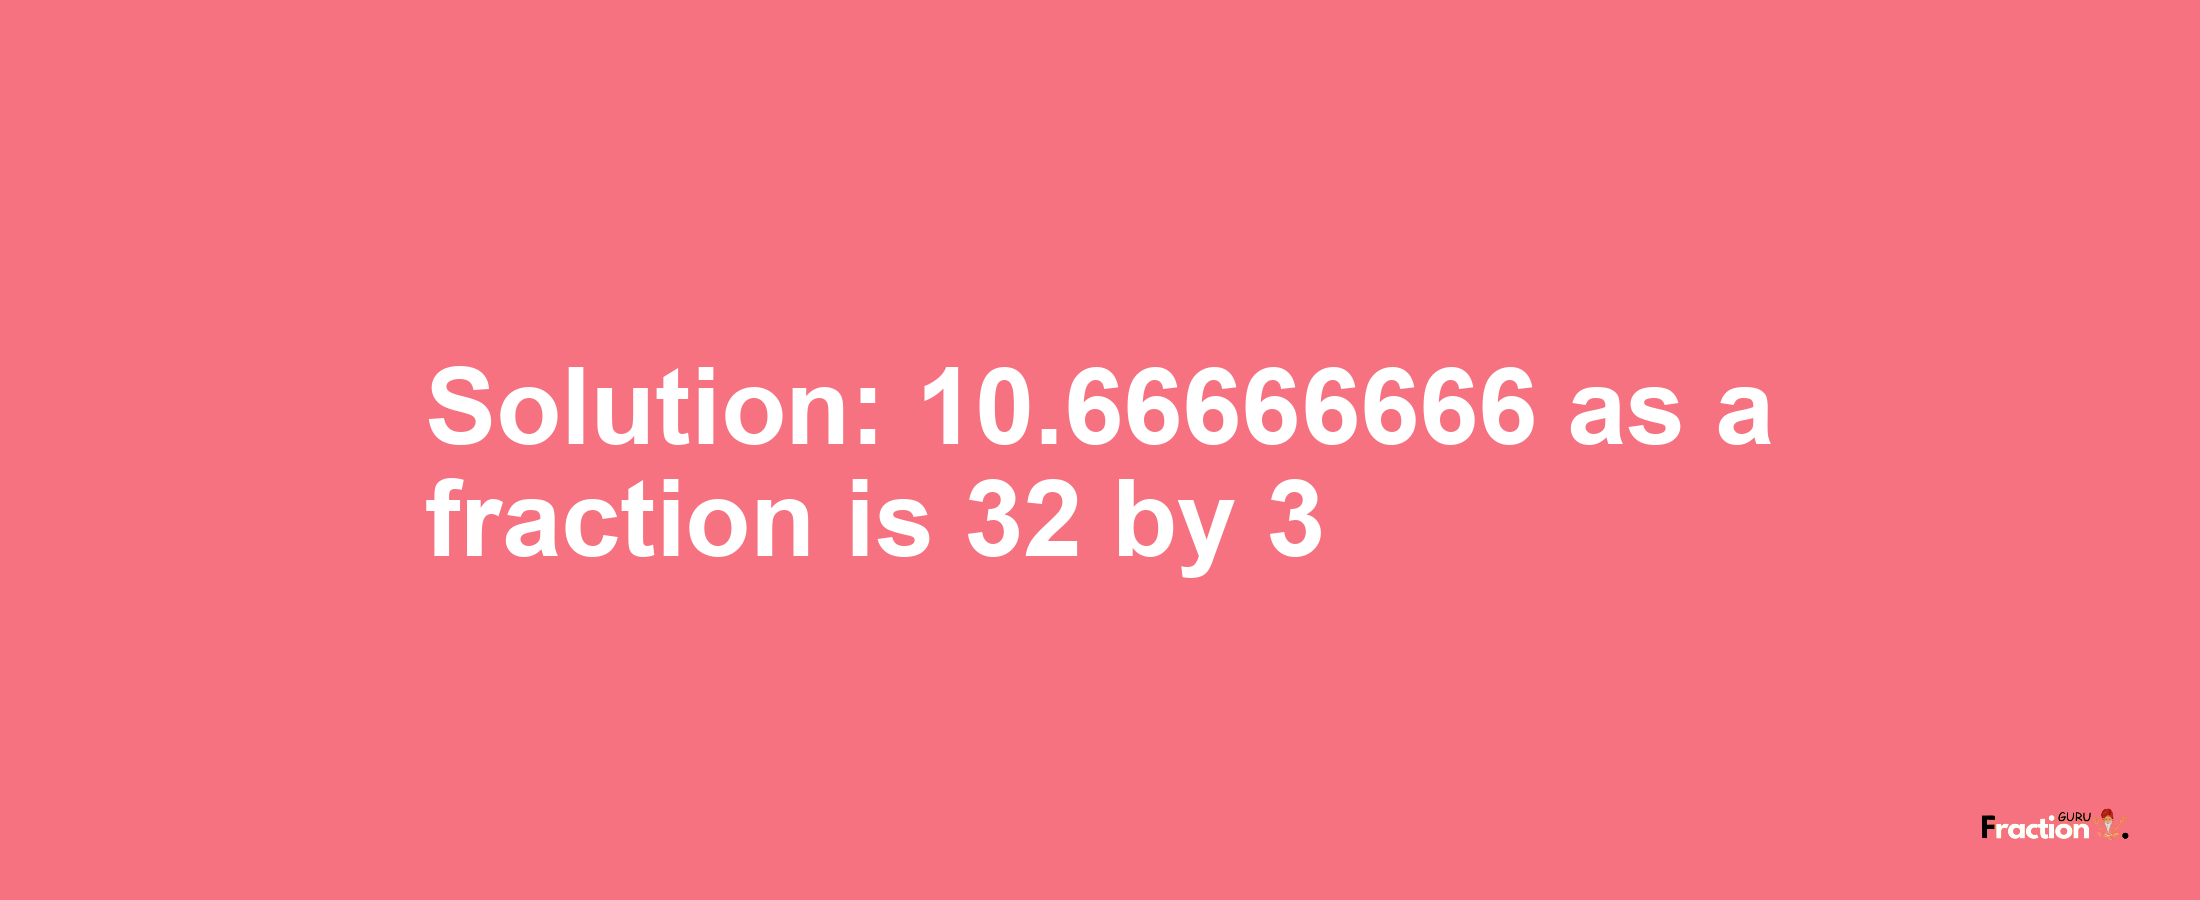 Solution:10.66666666 as a fraction is 32/3